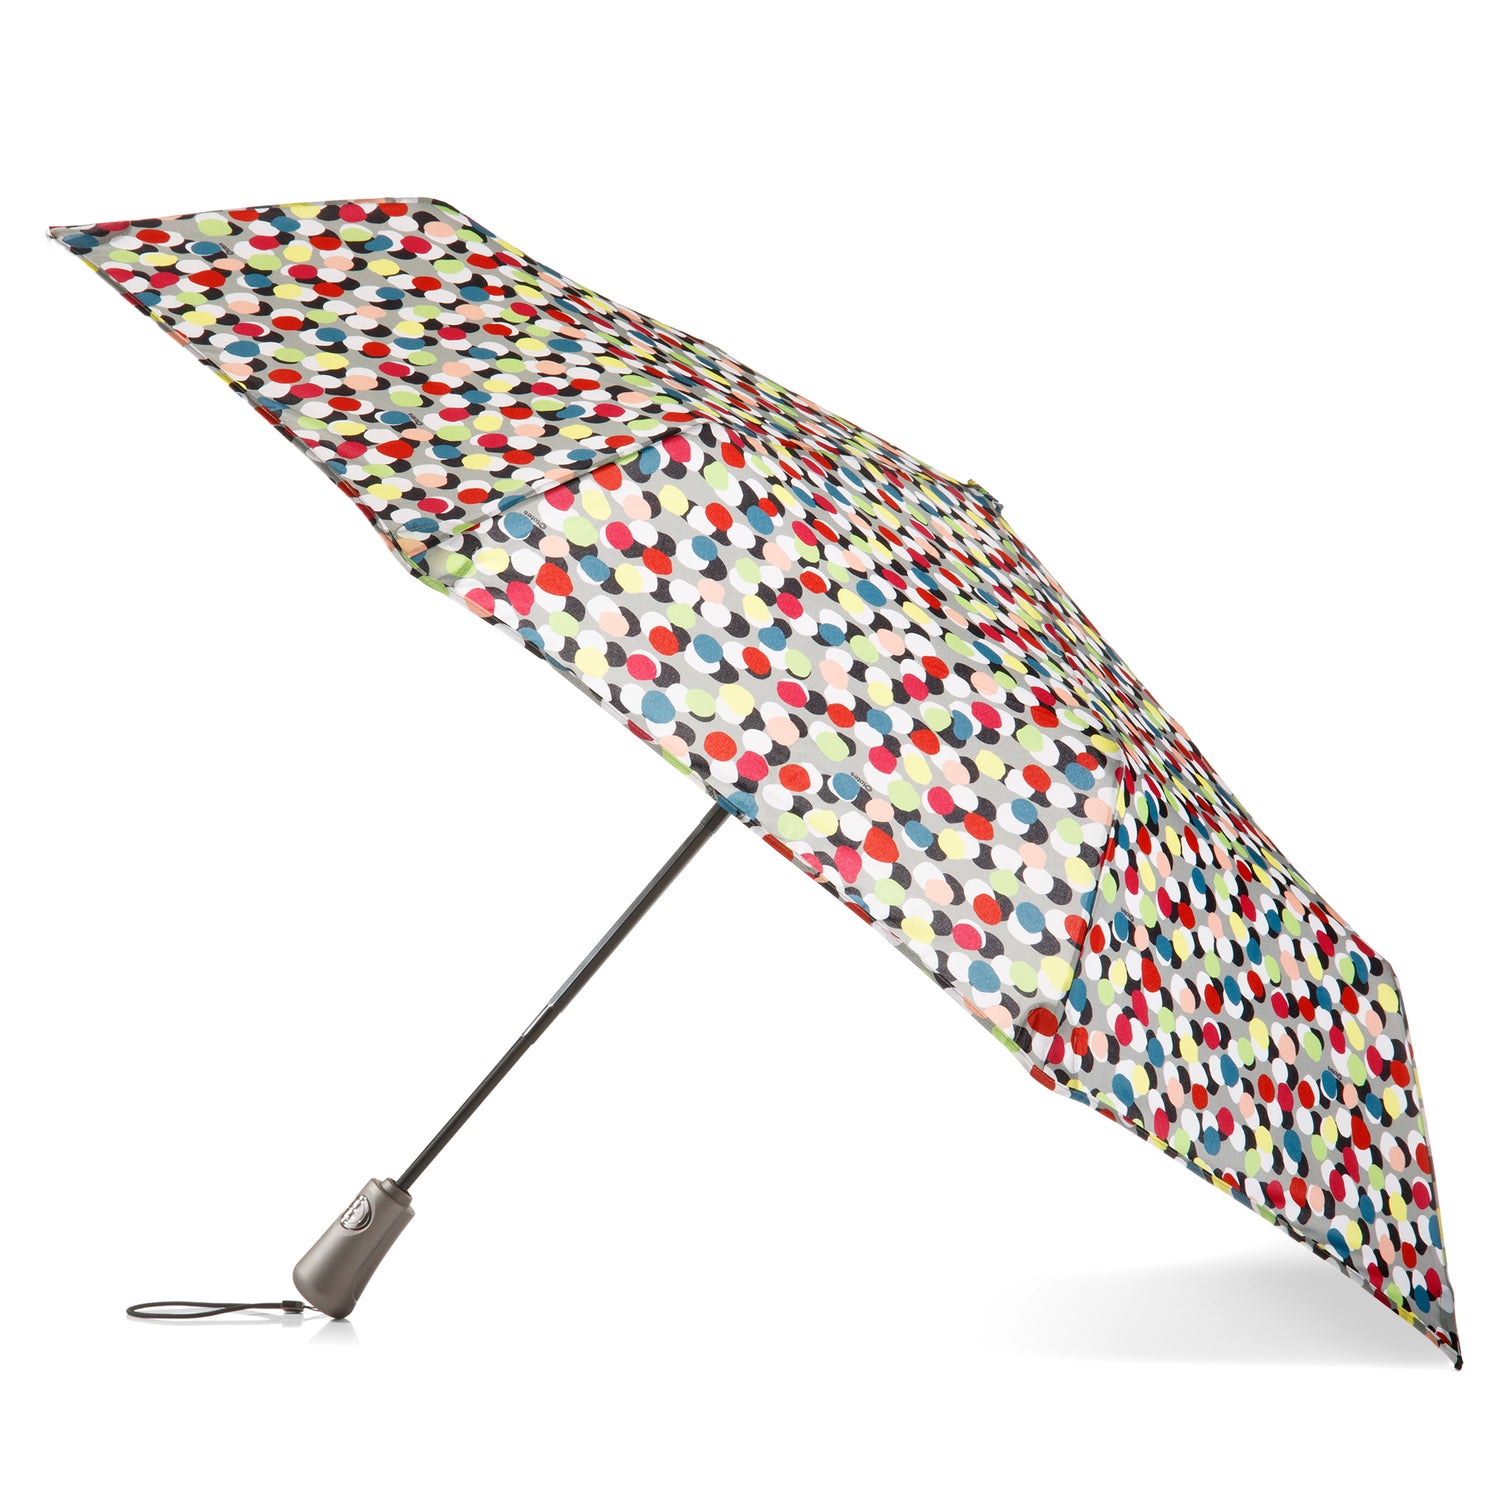 Recycled Total Protection Compact Folding Umbrella with Sunguard Technology